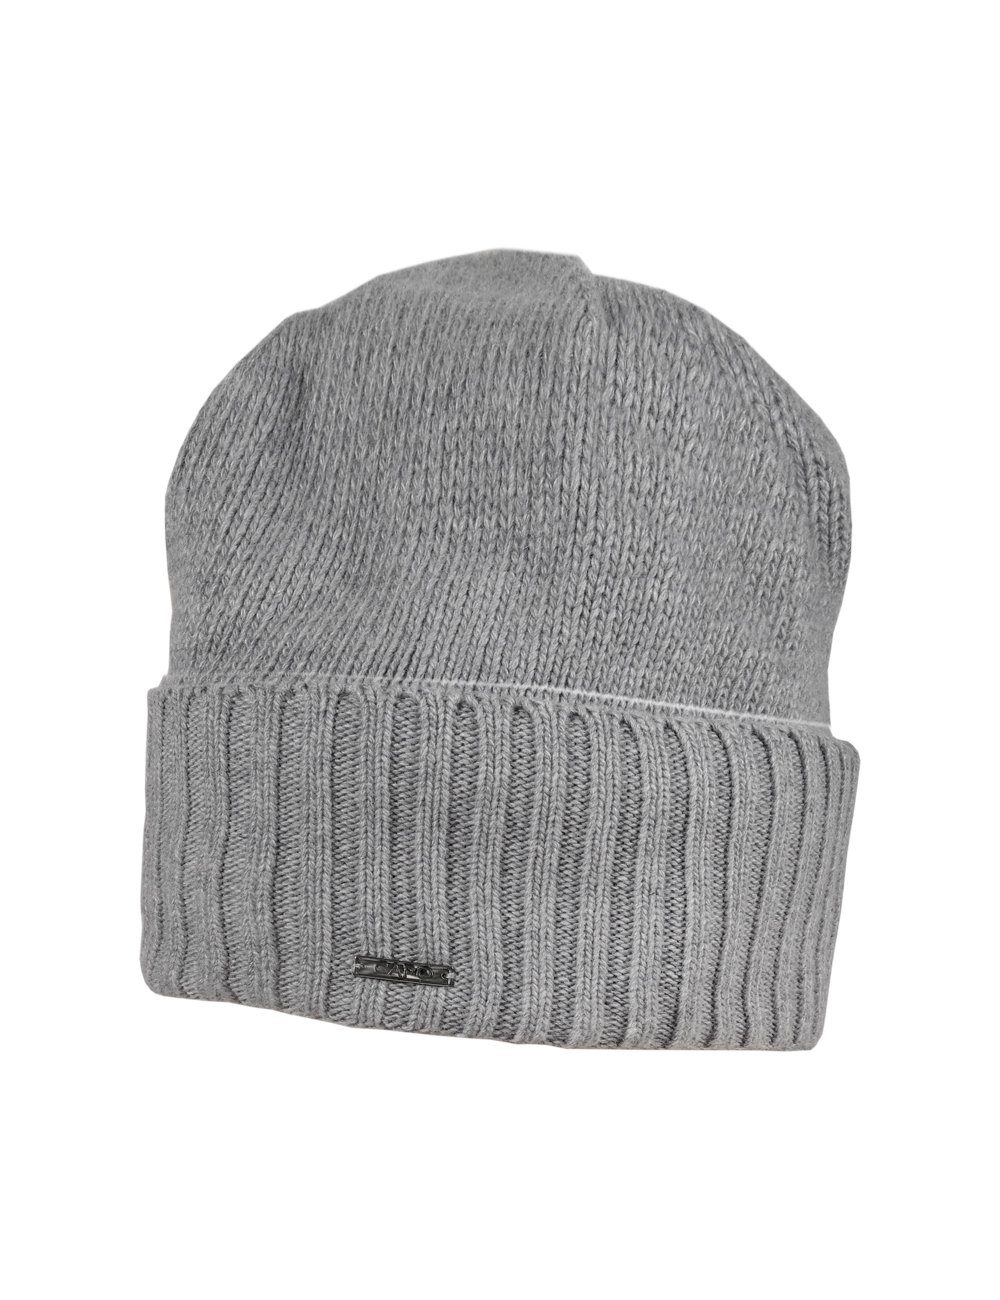 CAPO Strickmütze CAPO-HEAVEN CAP plain knitted cap, ribbed turn up Made in Europe silver